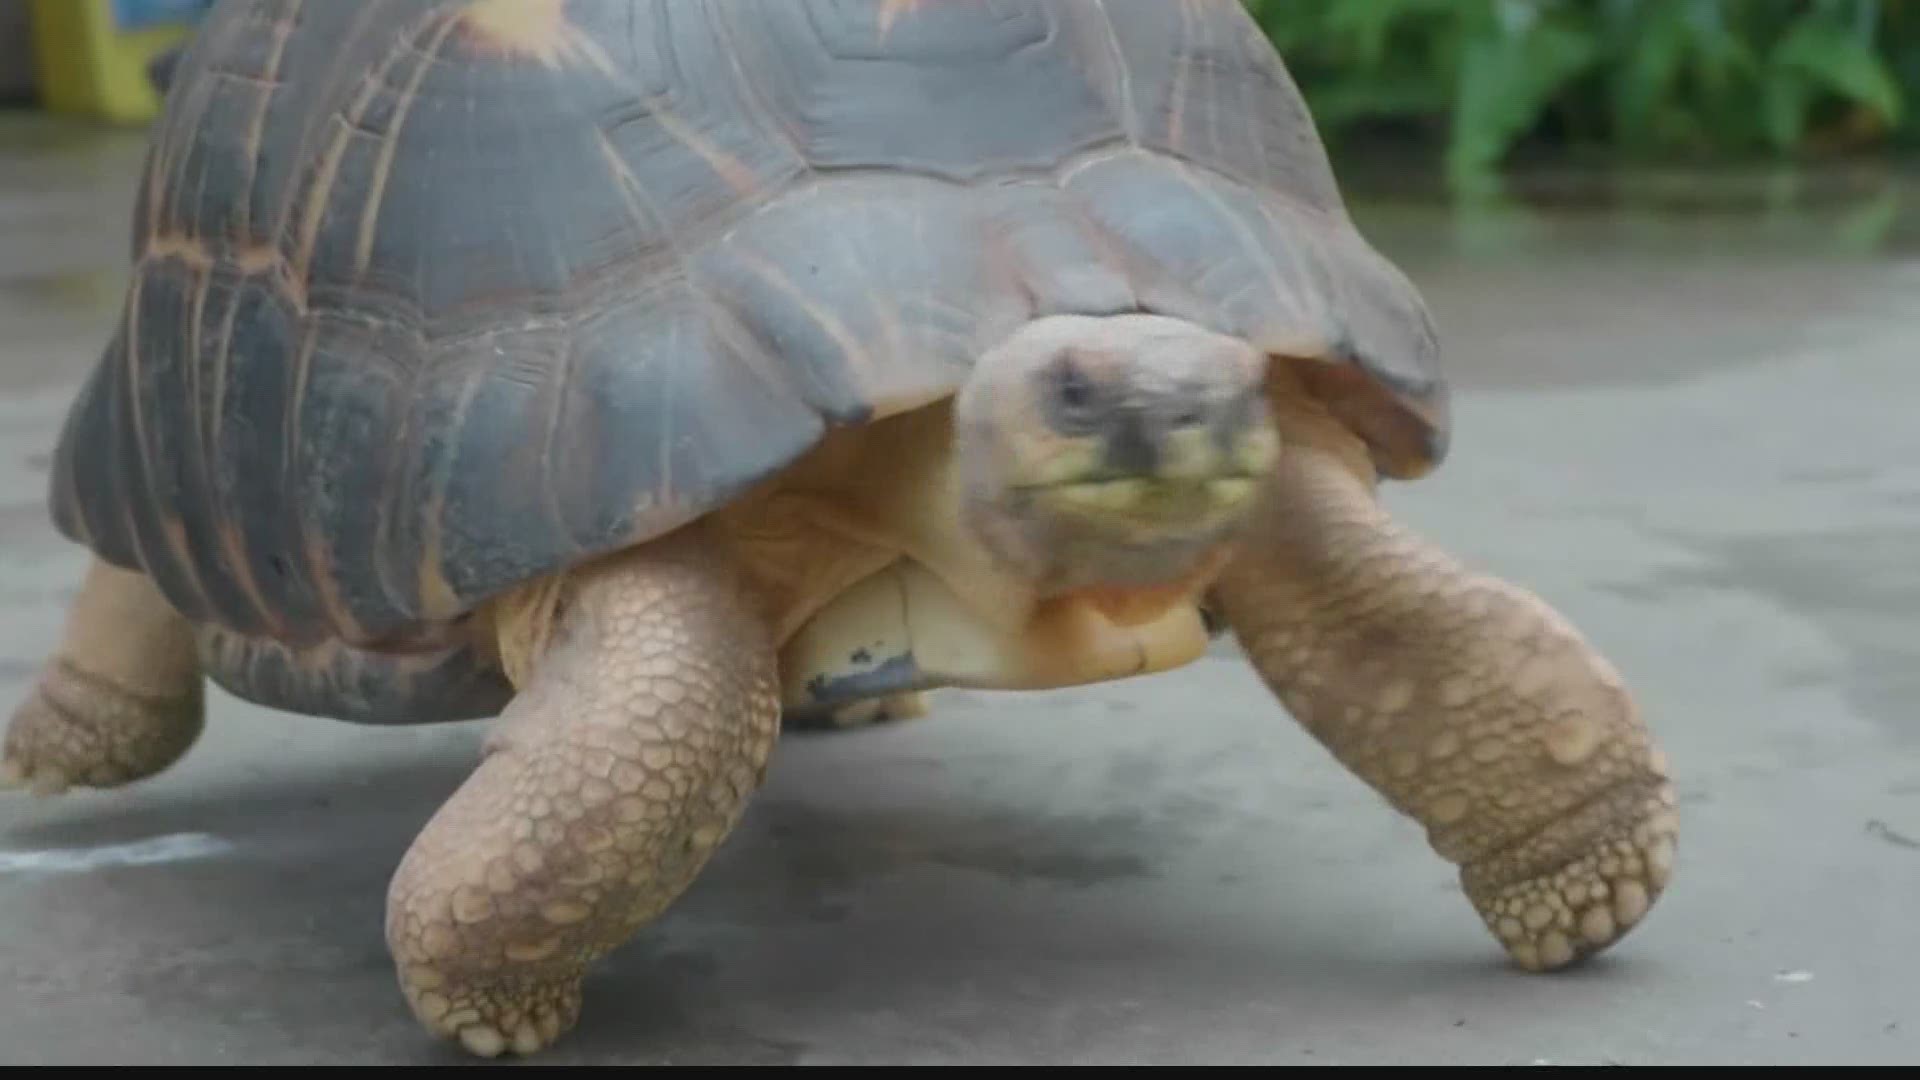 You've seen puppies, you've seen penguins, but what about tortoises strolling through the aquarium?